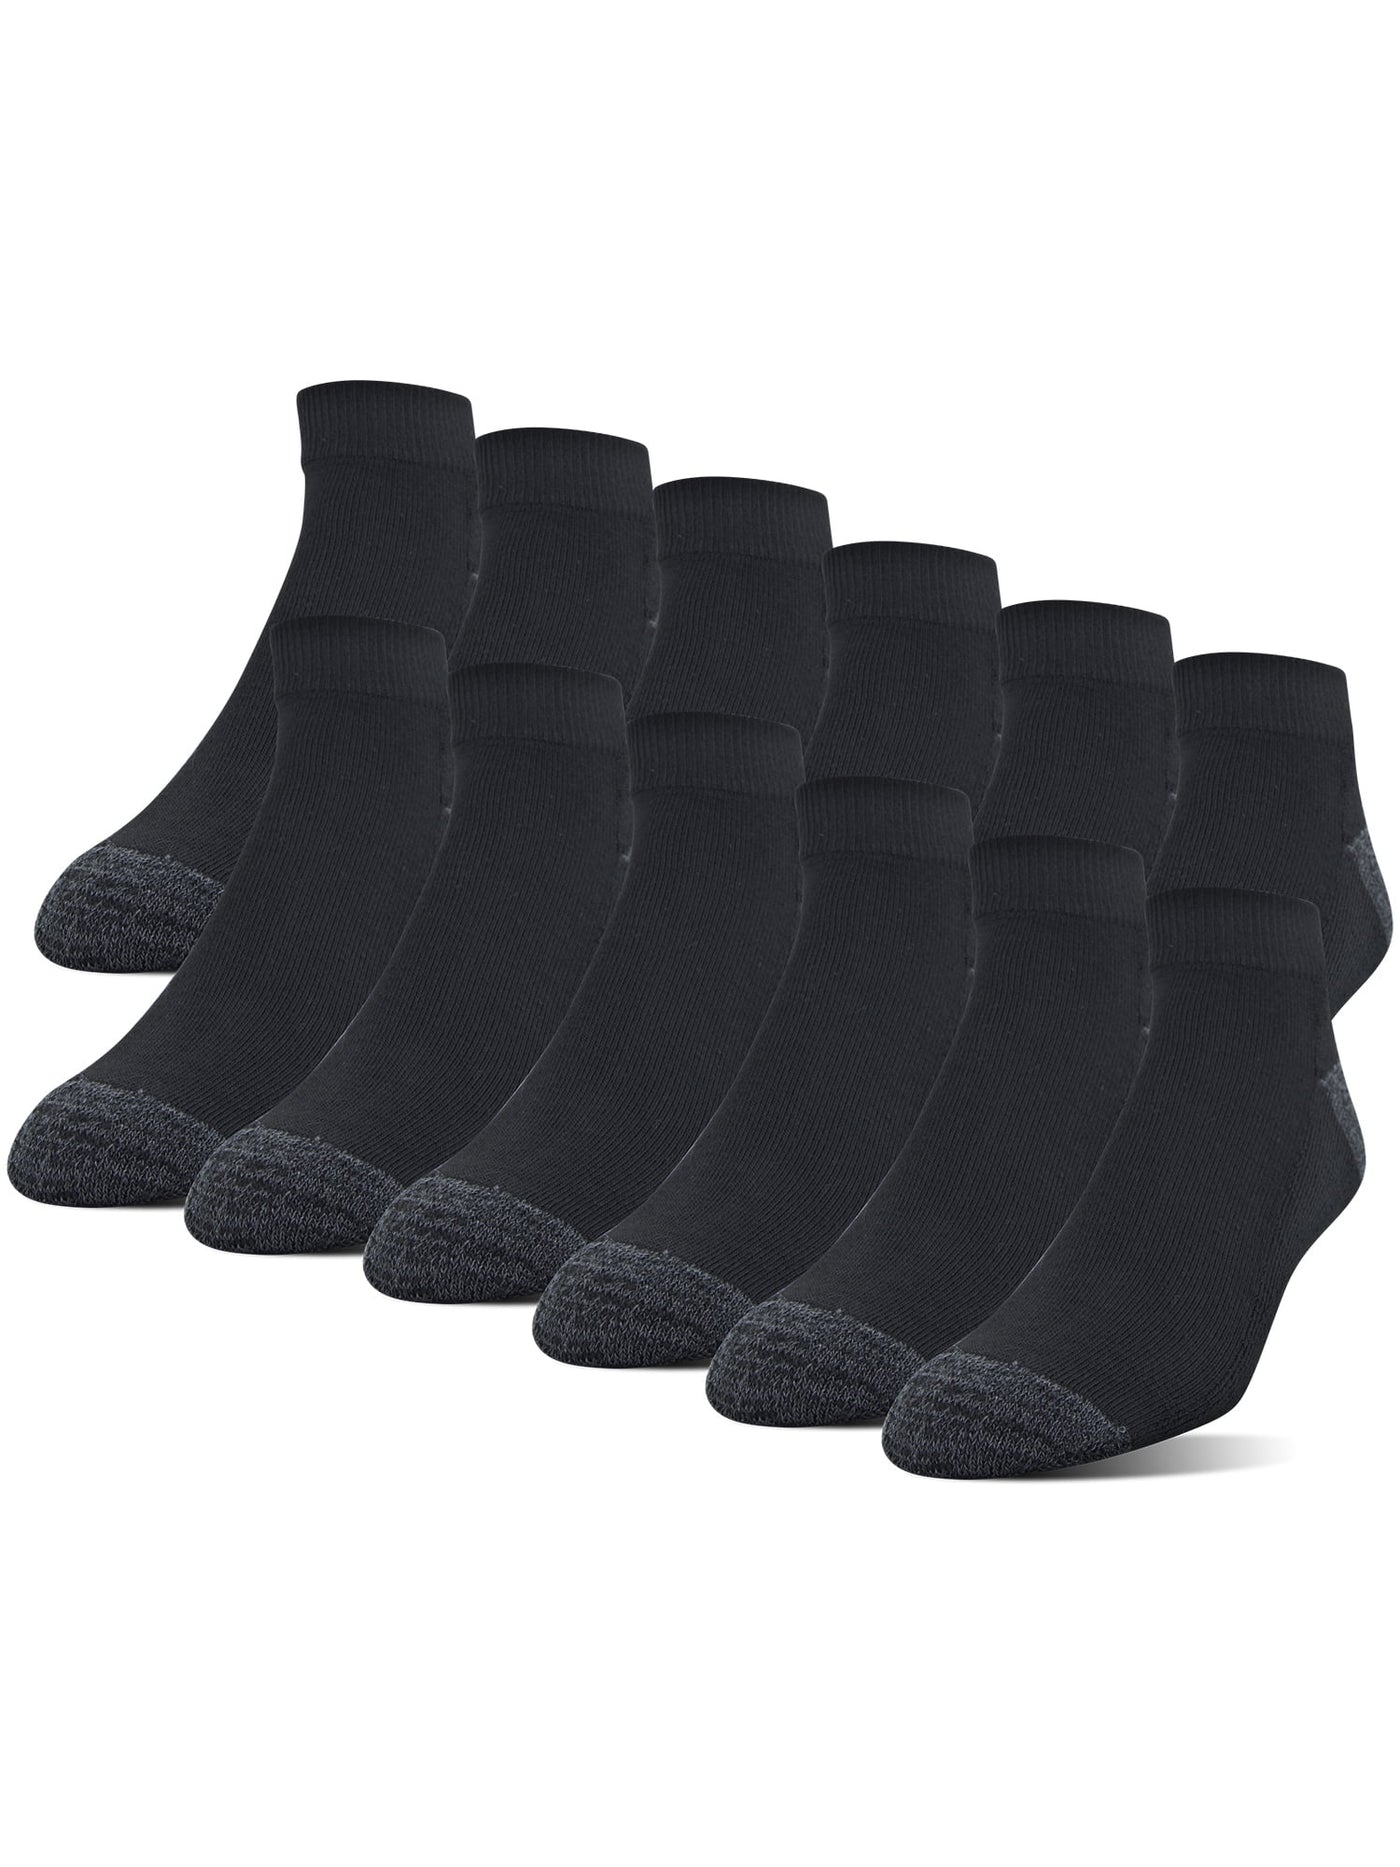 Men's Half Cushion Terry Low Cut Casual Socks, OS One Size, 12-Pack